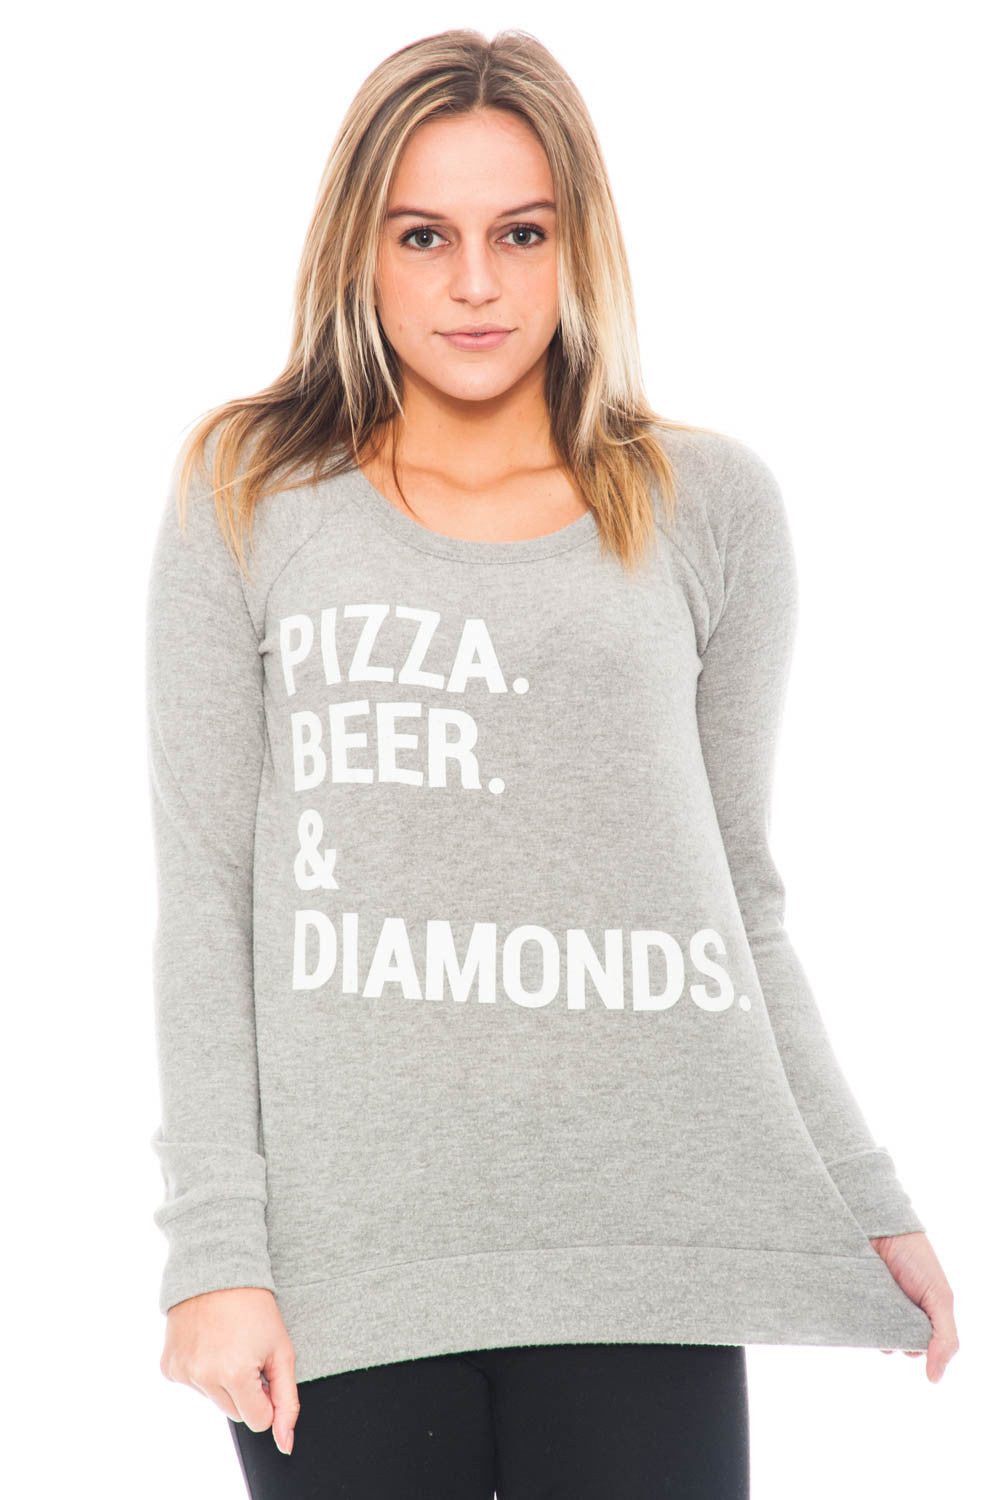 Sweater - Pizza Beer & Diamonds Crewneck with Open Back by Chaser